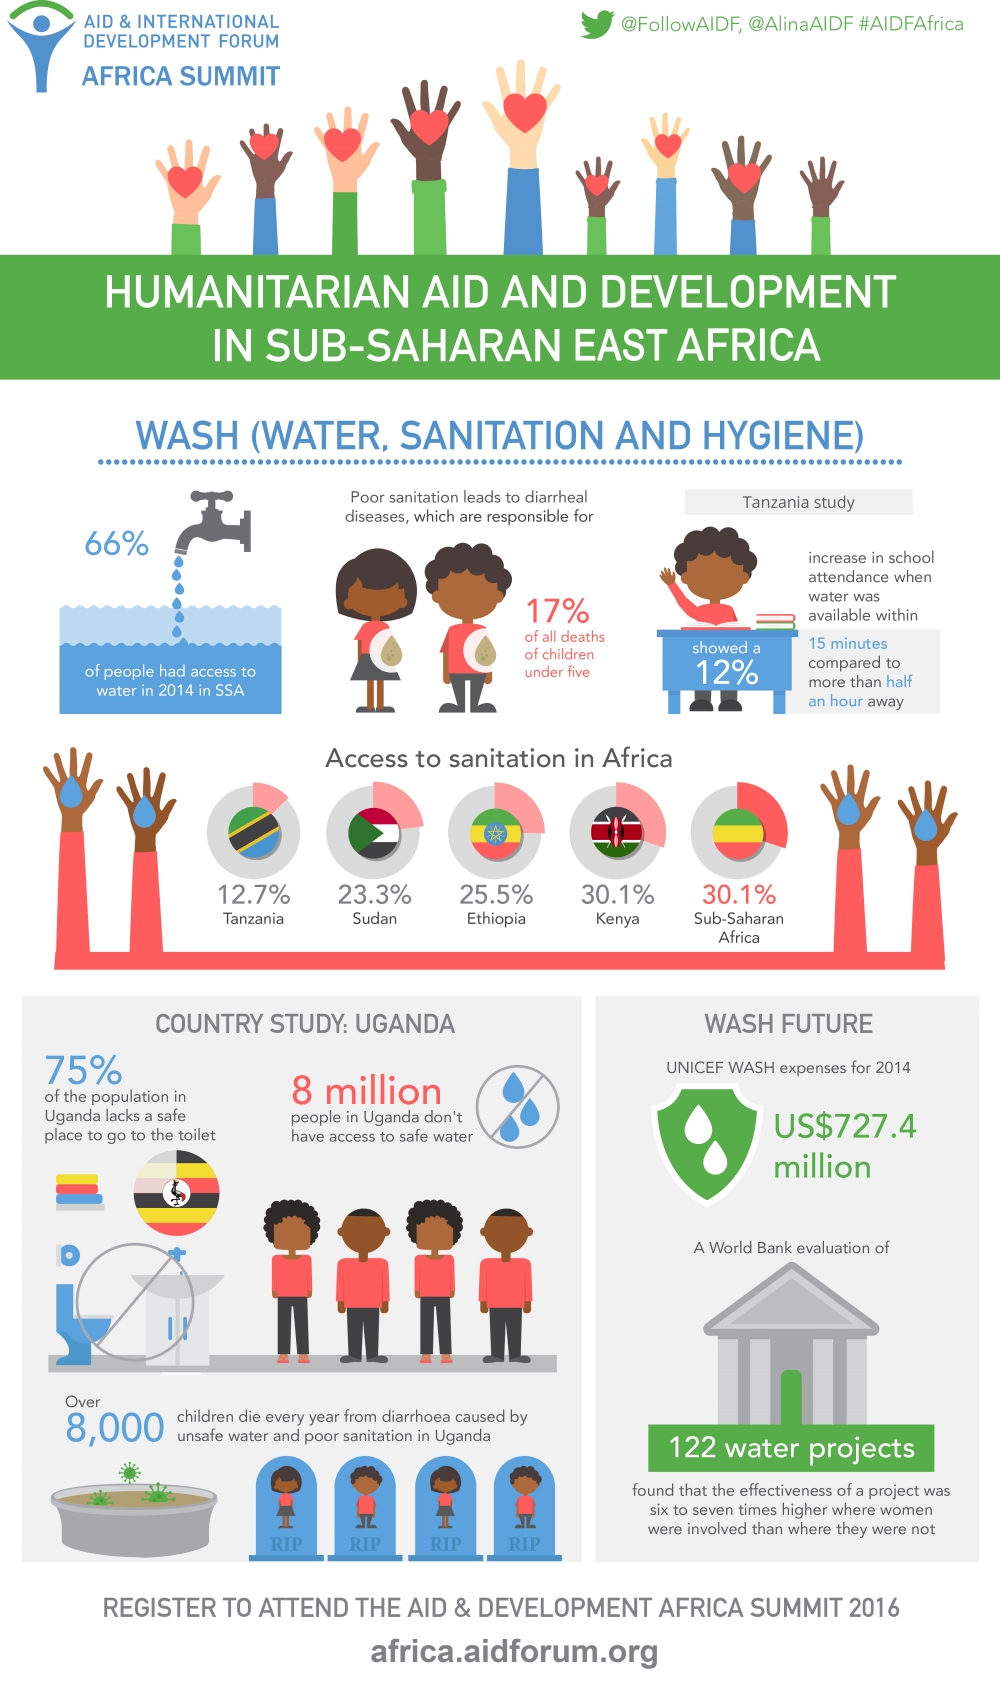 [Infographic] Water, sanitation and hygiene in Sub-Saharan Africa